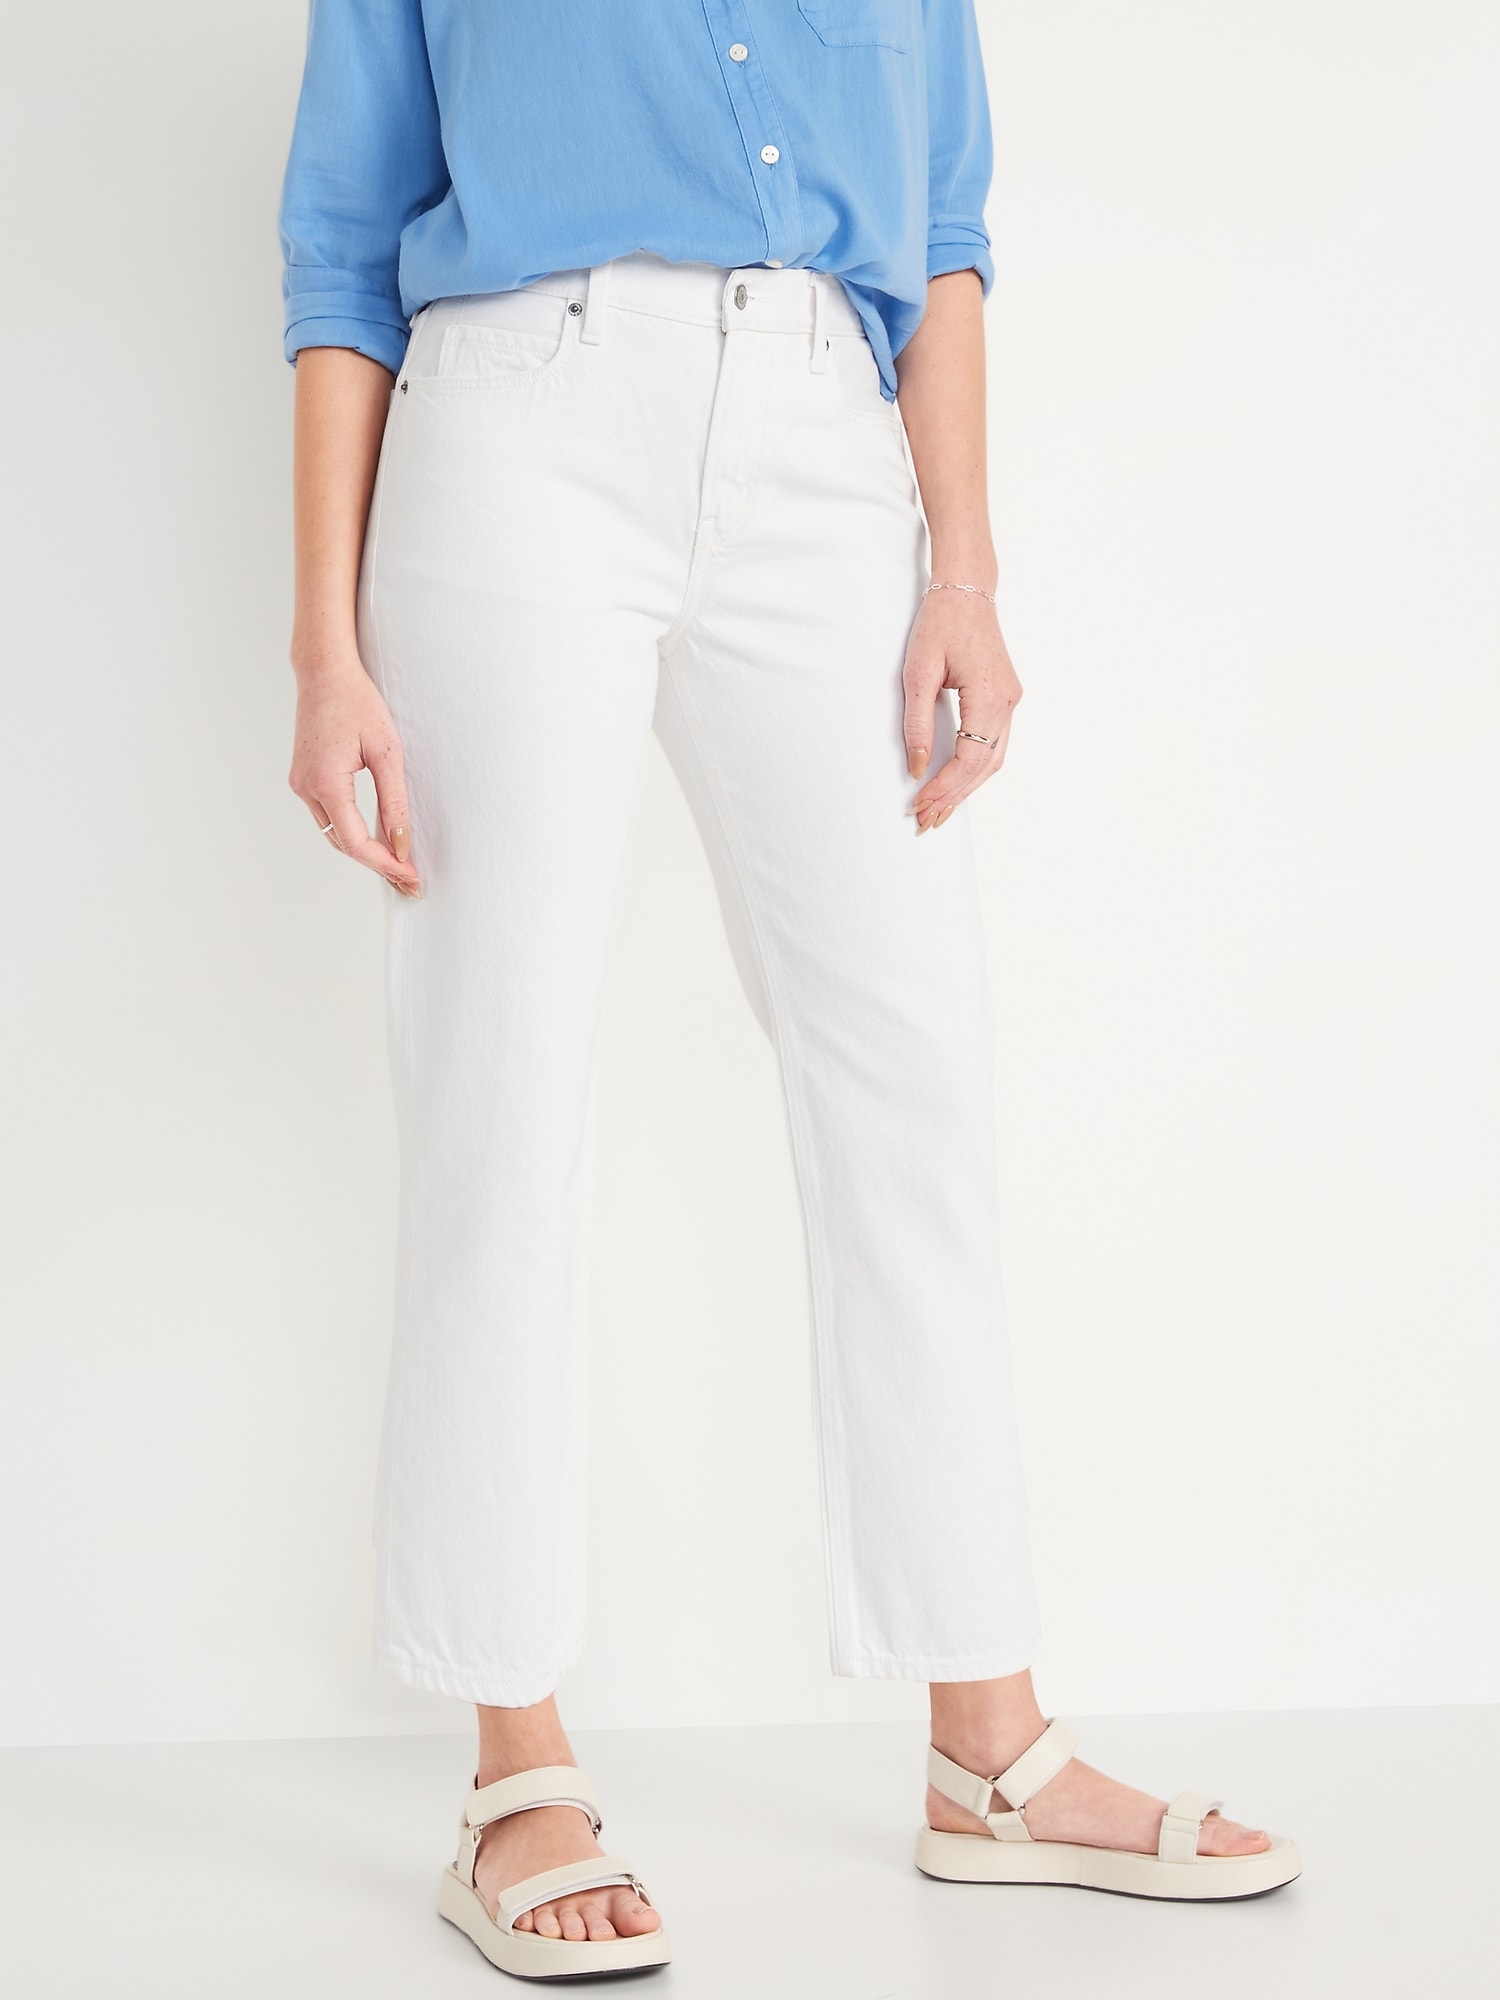 High-Waisted Slouchy Straight Cropped Non-Stretch White Jeans for